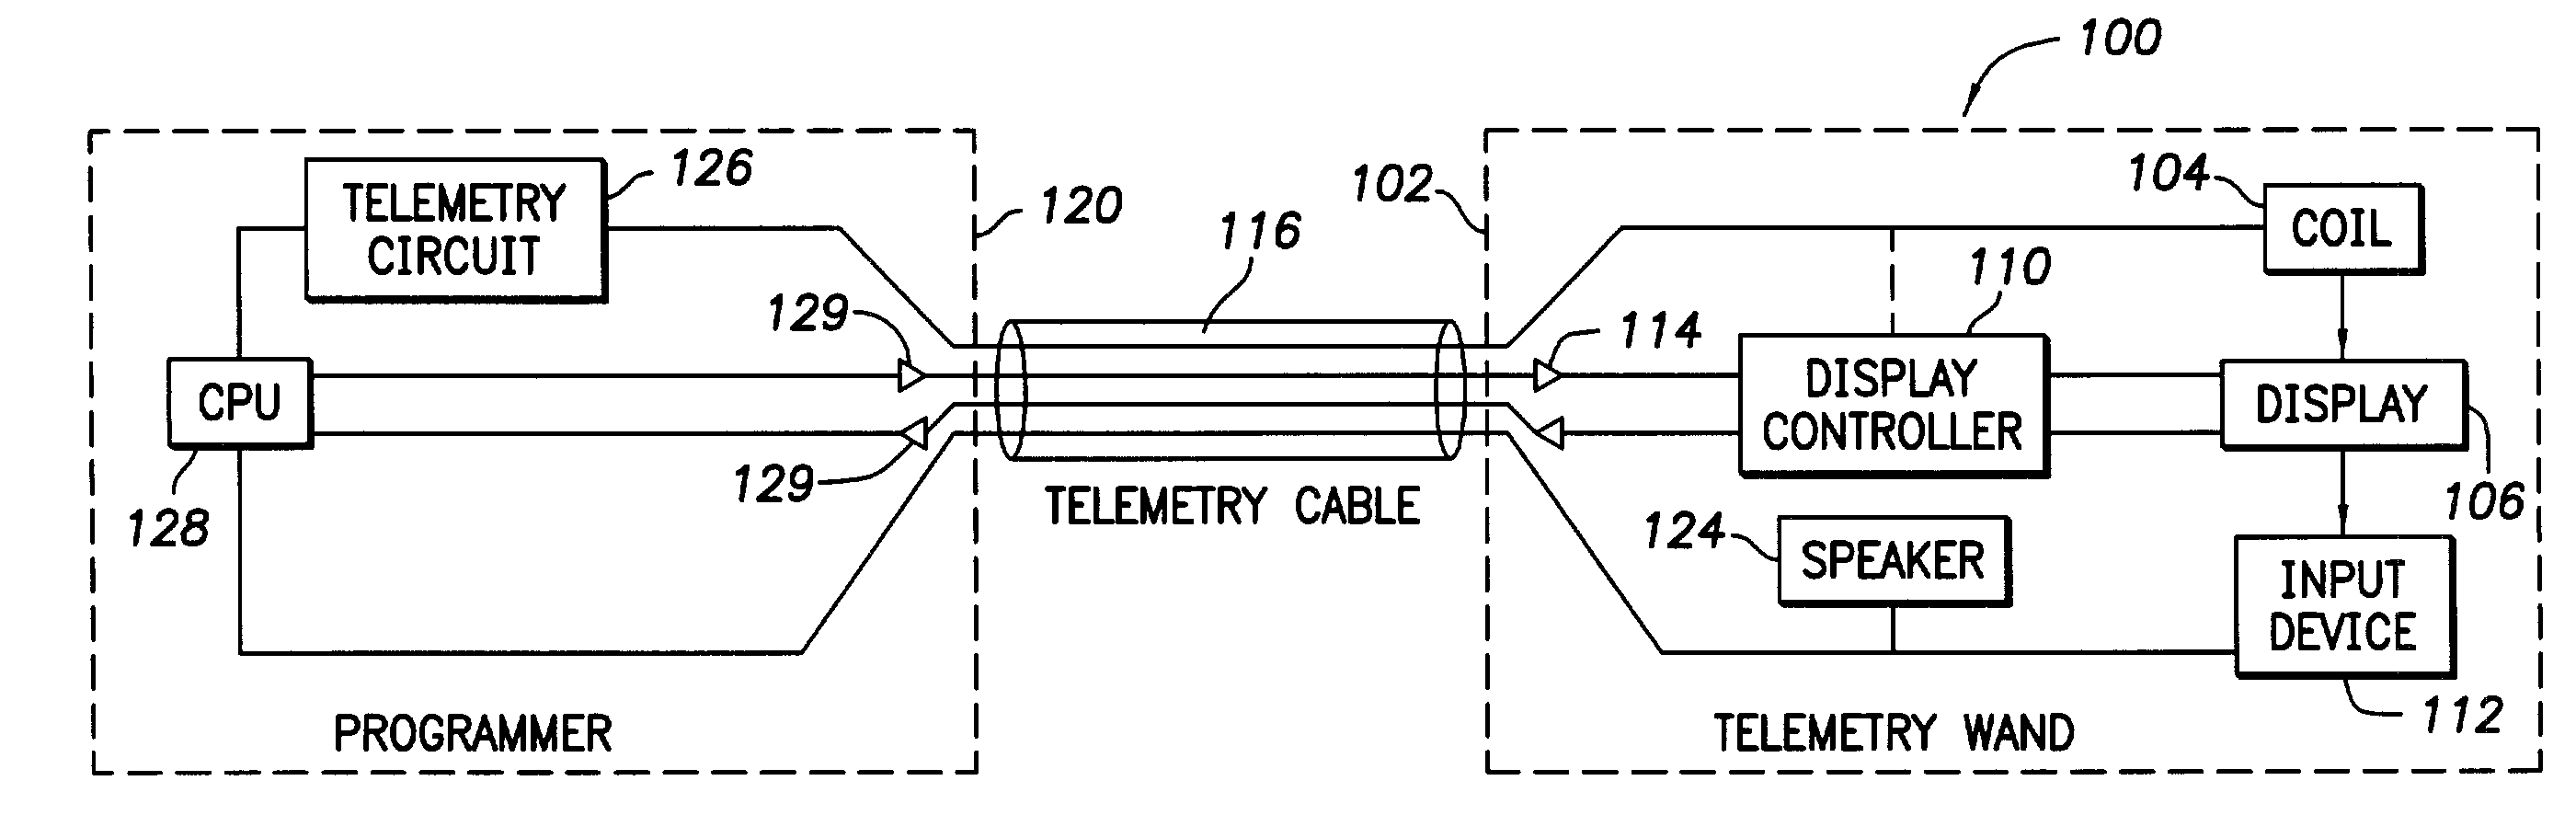 Telemetry wand with display and control for implantable medical devices